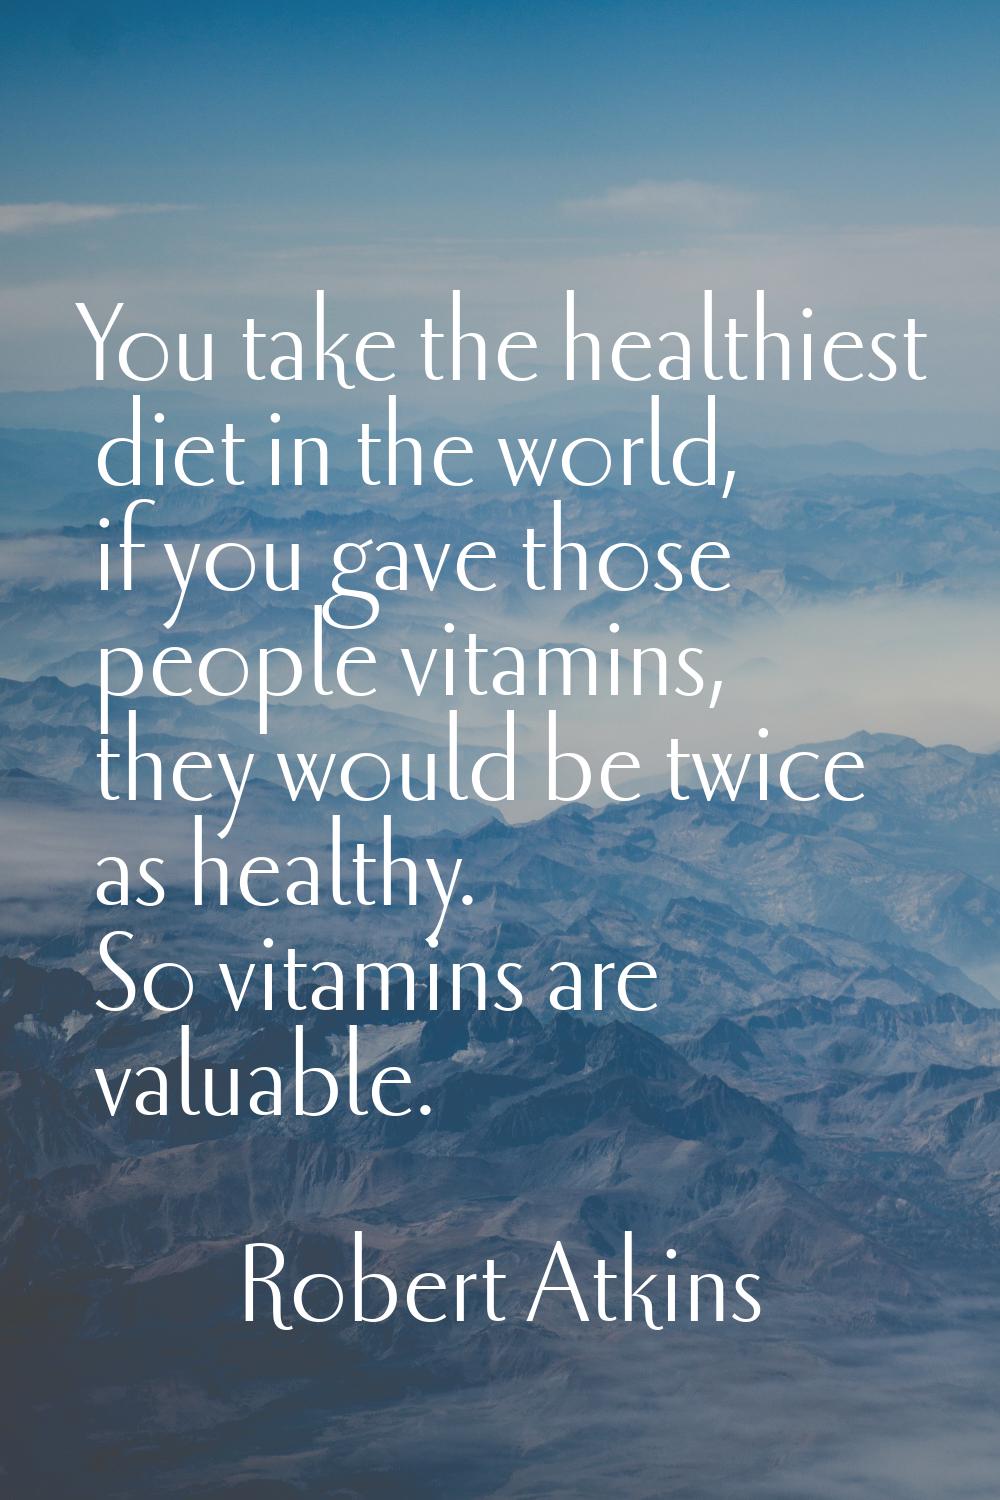 You take the healthiest diet in the world, if you gave those people vitamins, they would be twice a